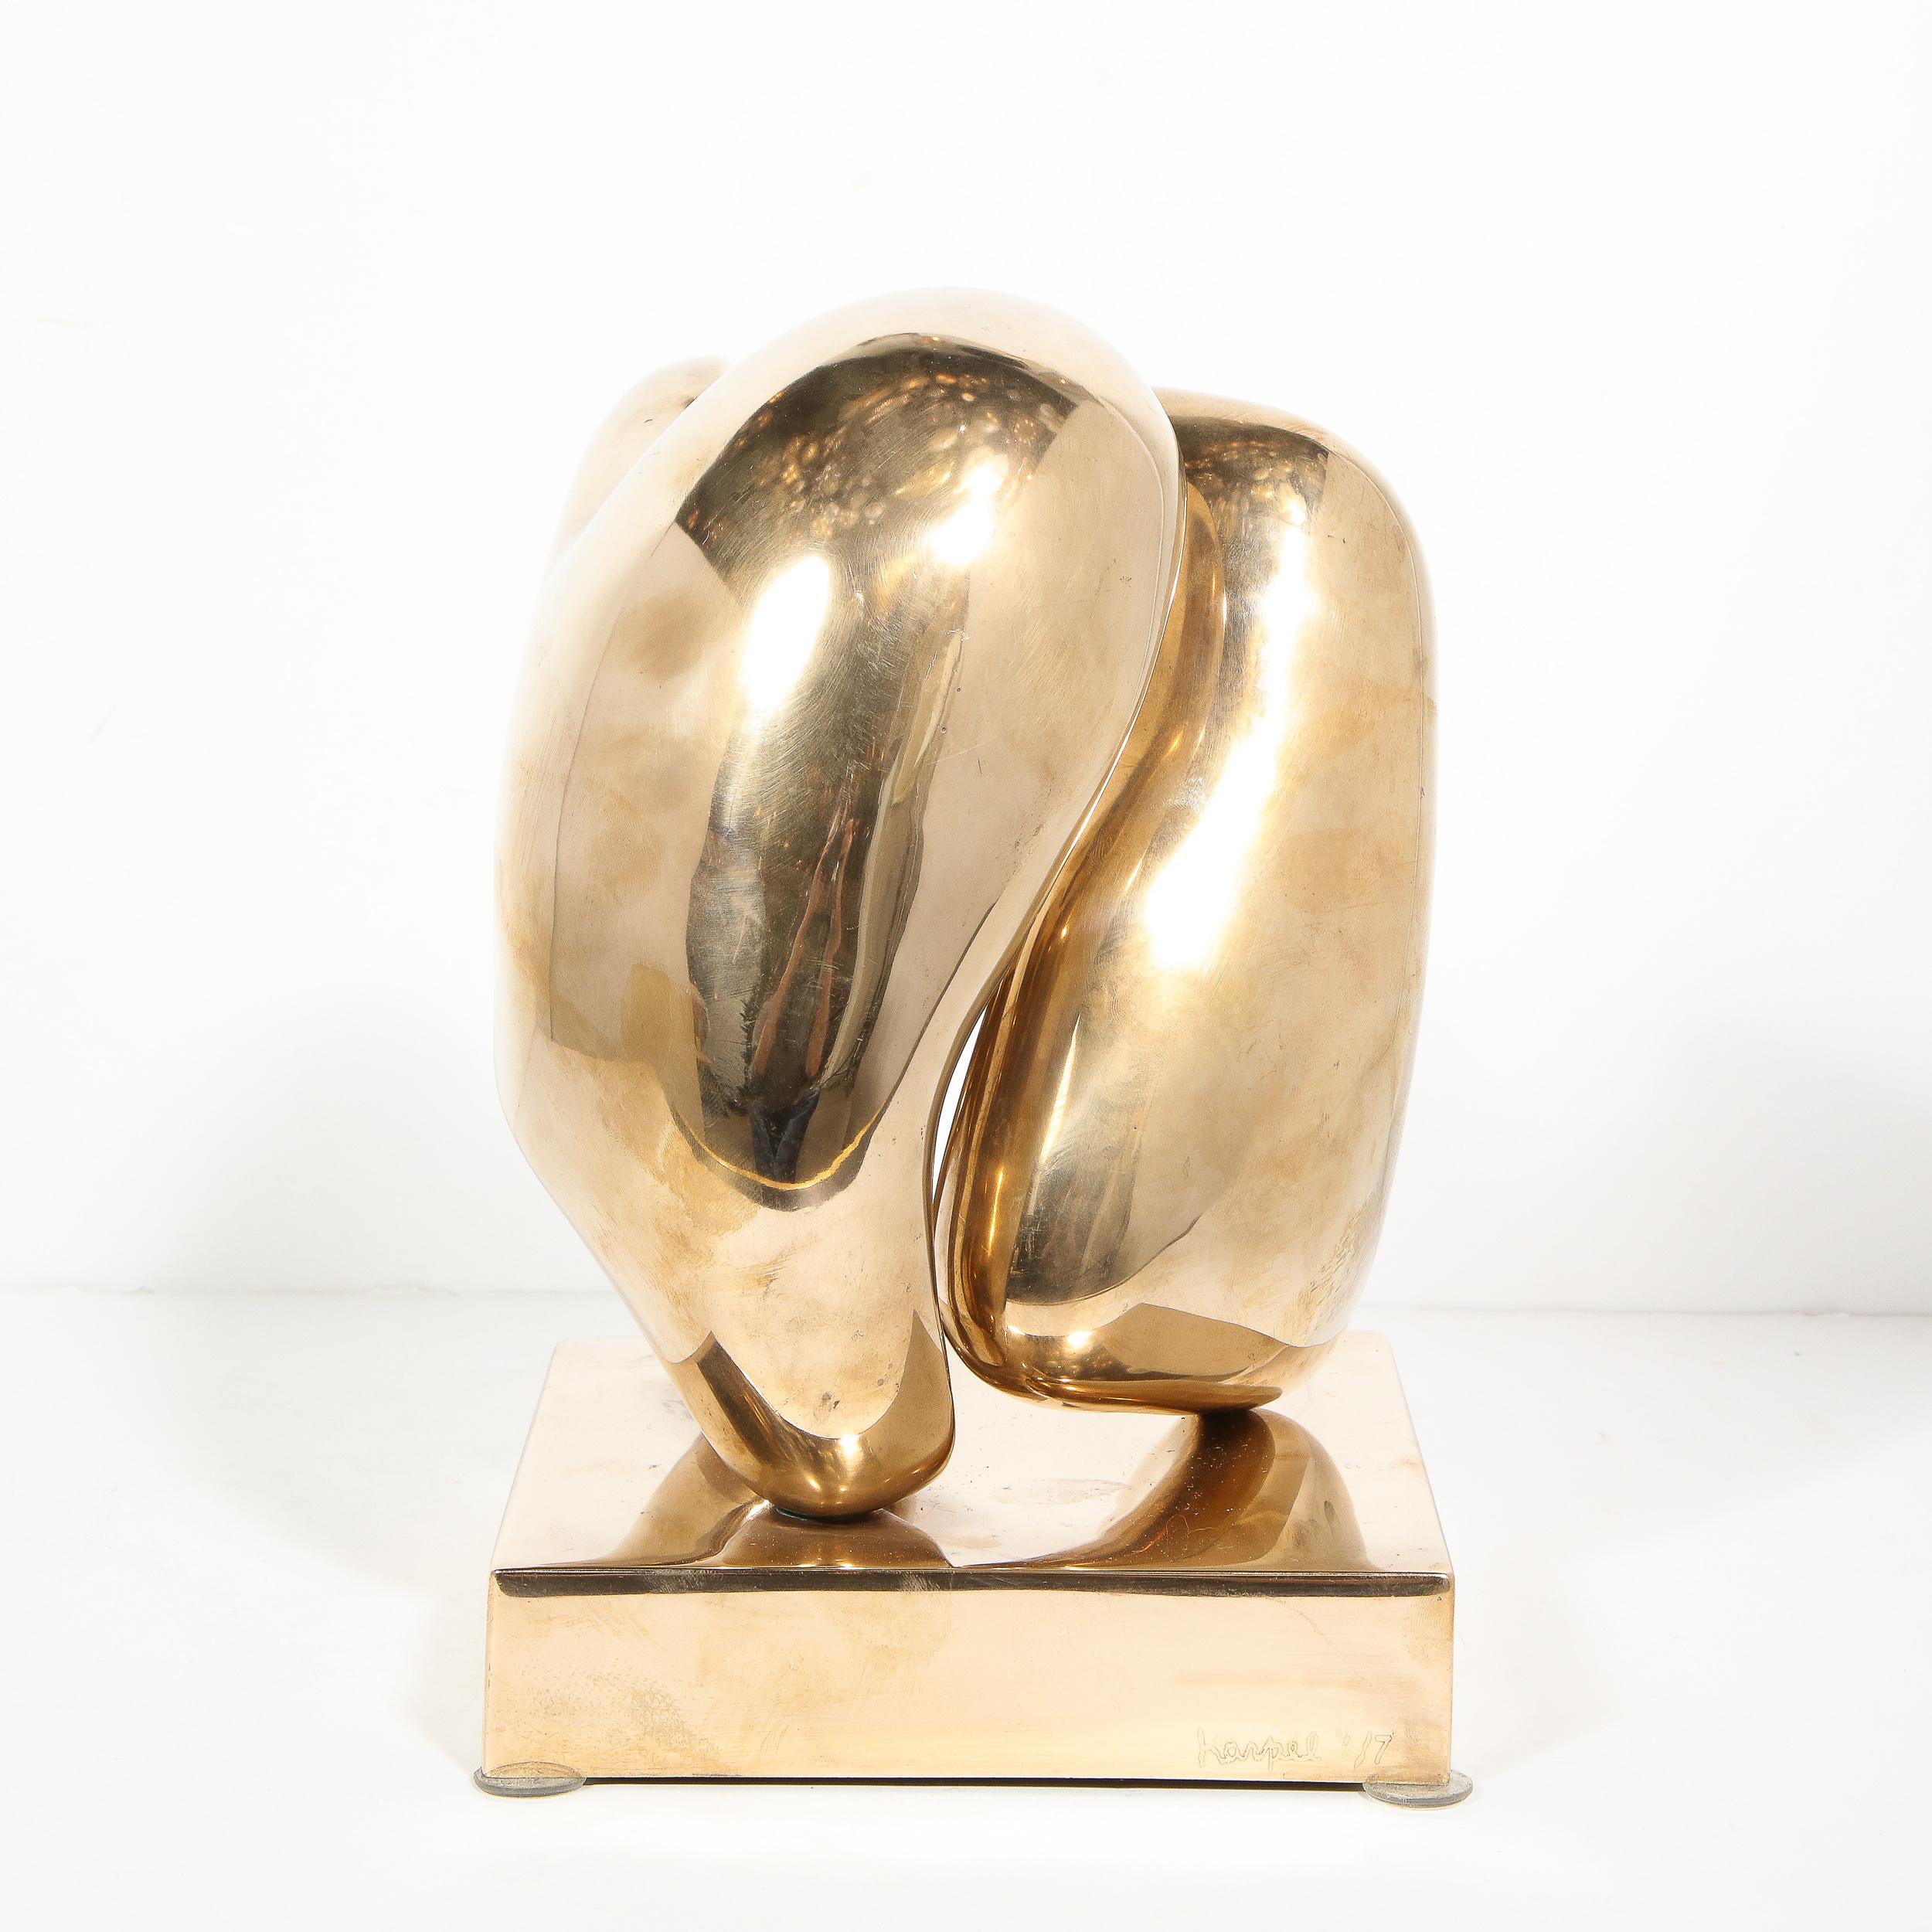 20th Century Mid-Century Modern Abstract Polished Brass Amorphic Sculpture Signed by Karpel